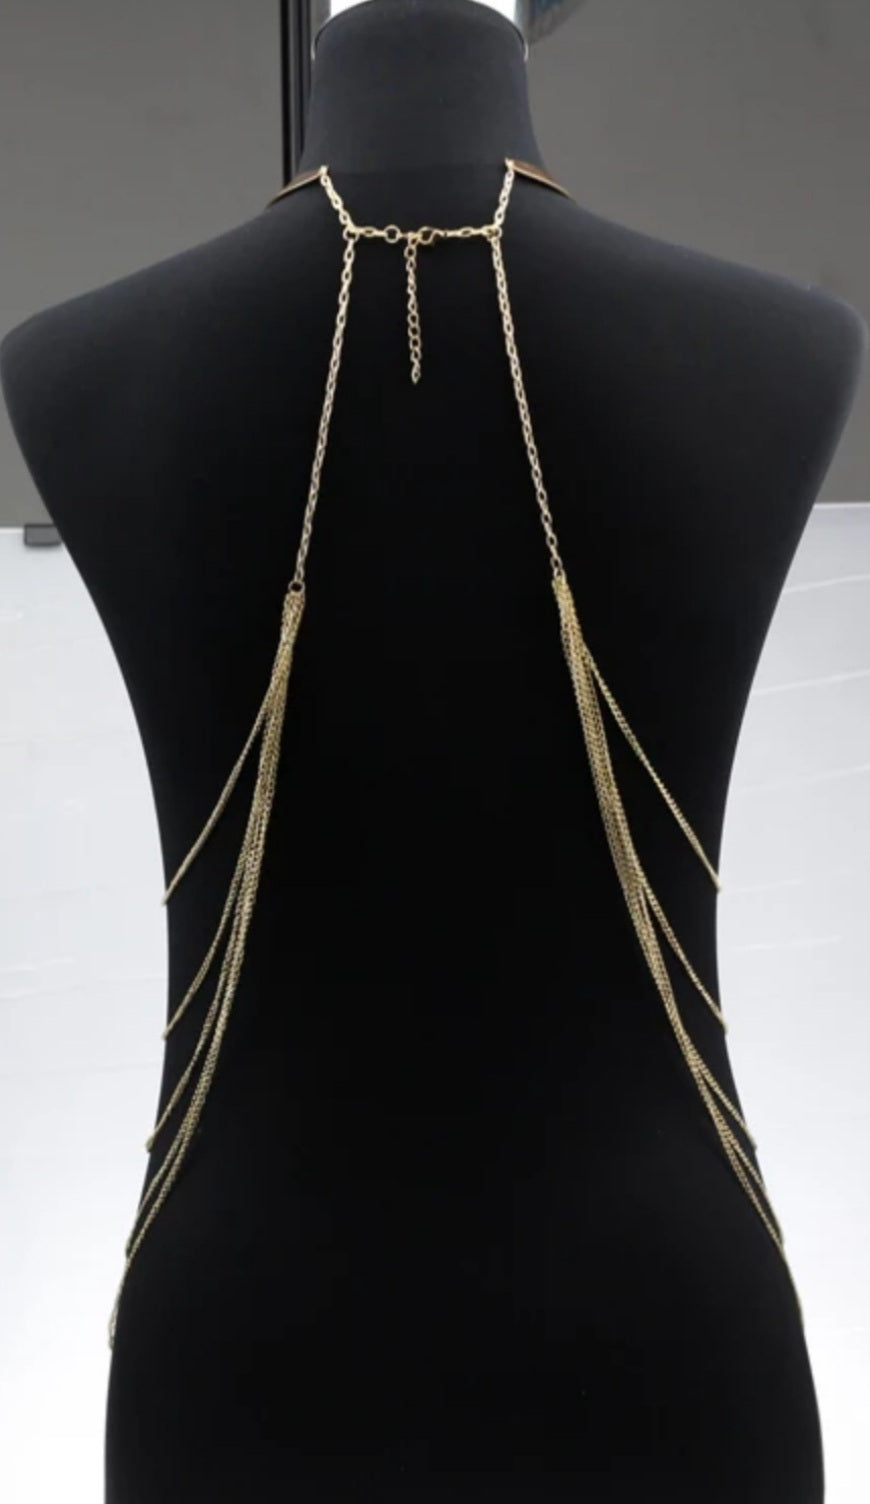 Kama Sutra Body Necklace – Glam Hoarder